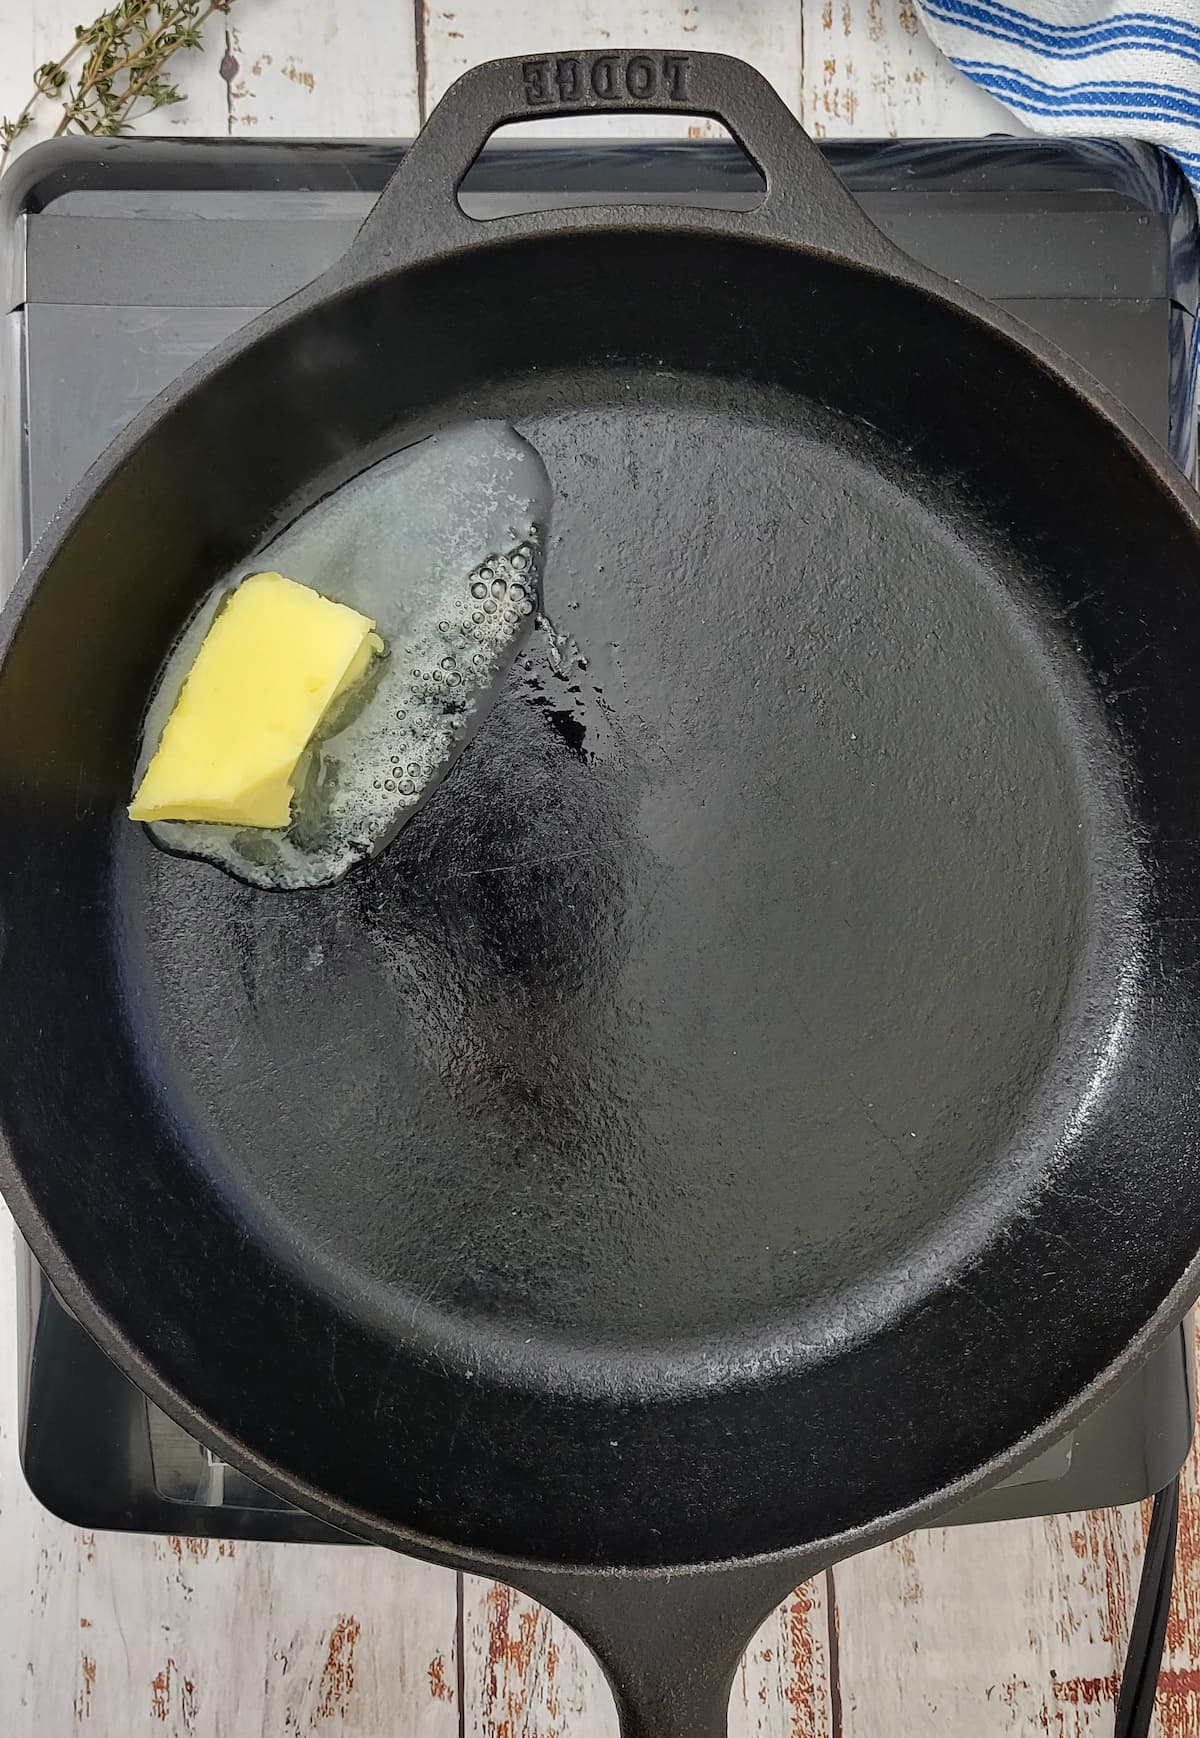 butter melting in a cast iron skillet